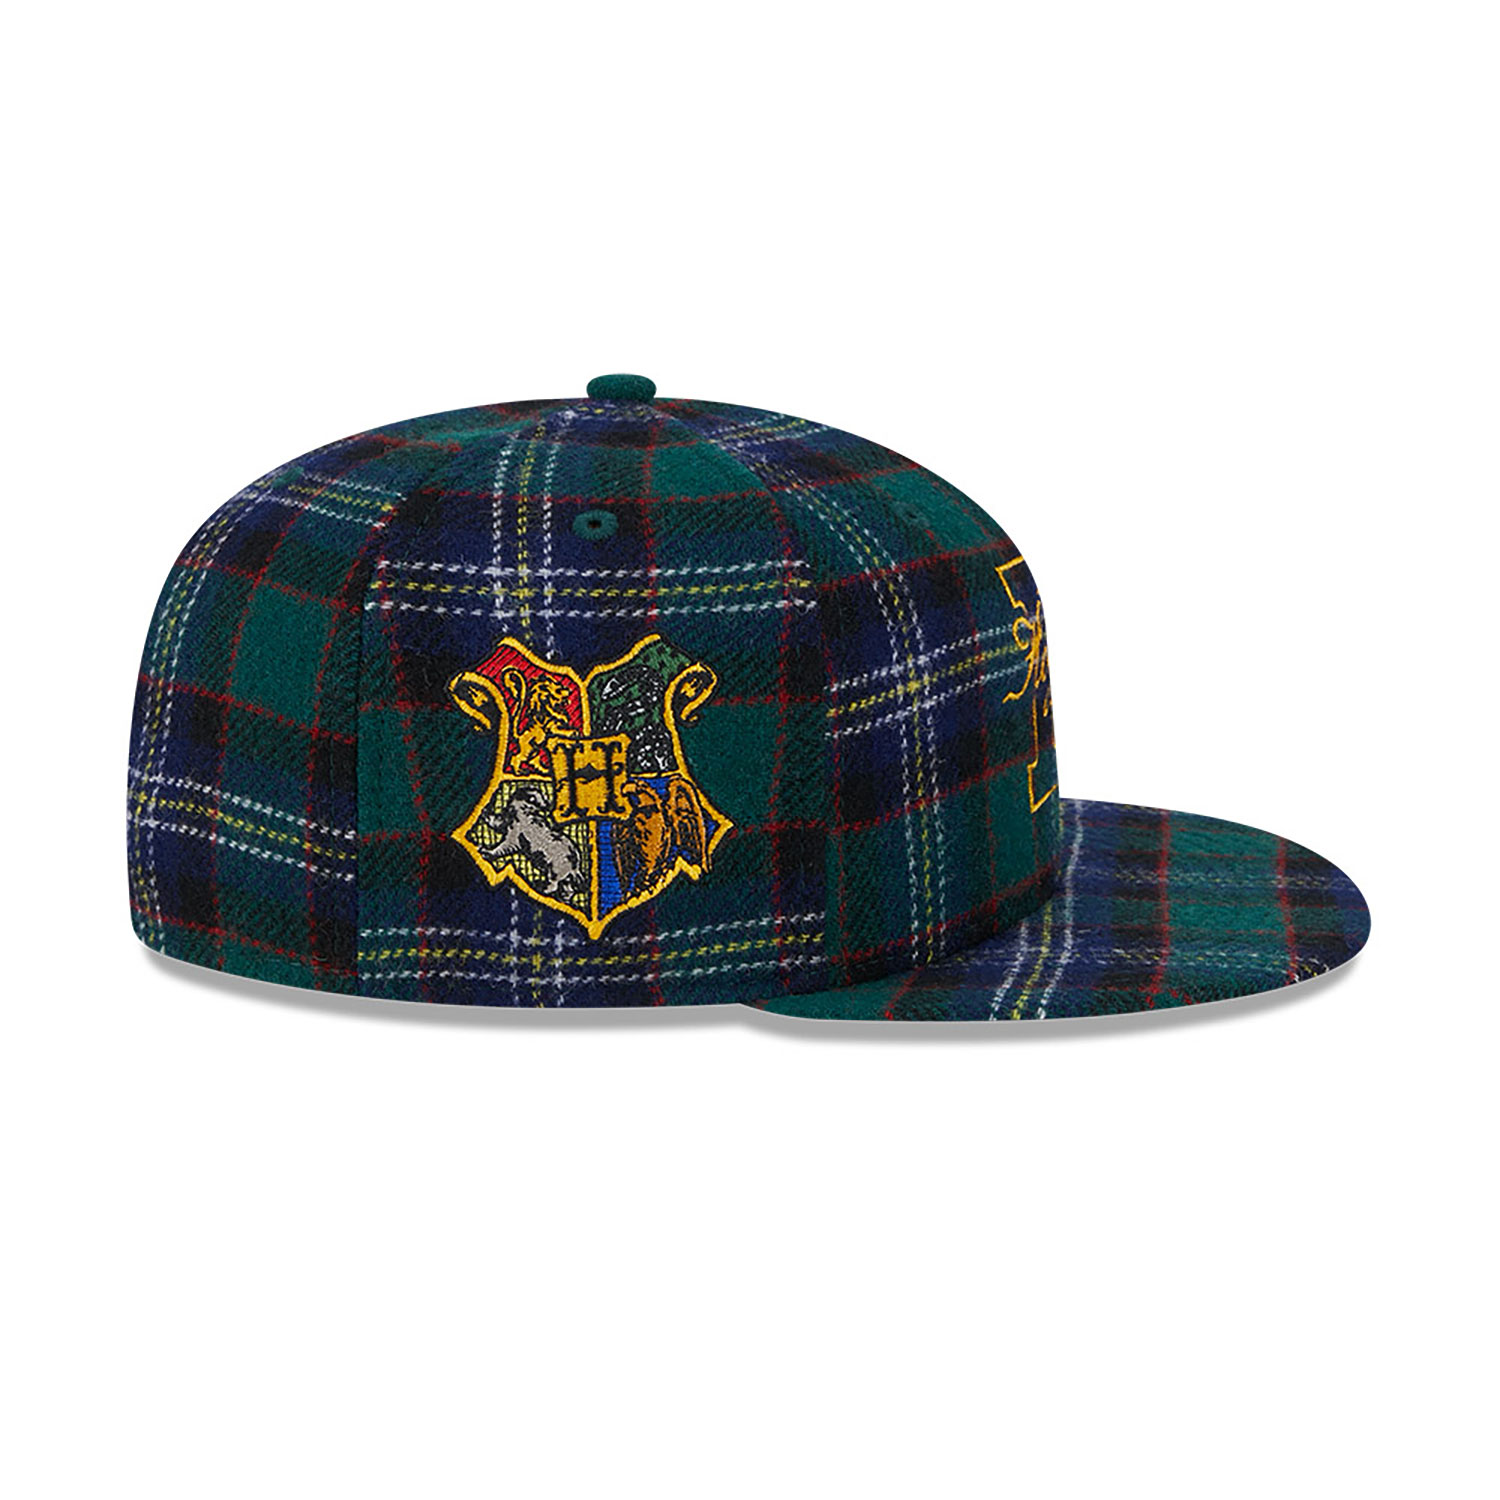 Harry Potter and the Deathly Hallows Part 2 Hogwarts Plaid Dark Green 59FIFTY Fitted Cap